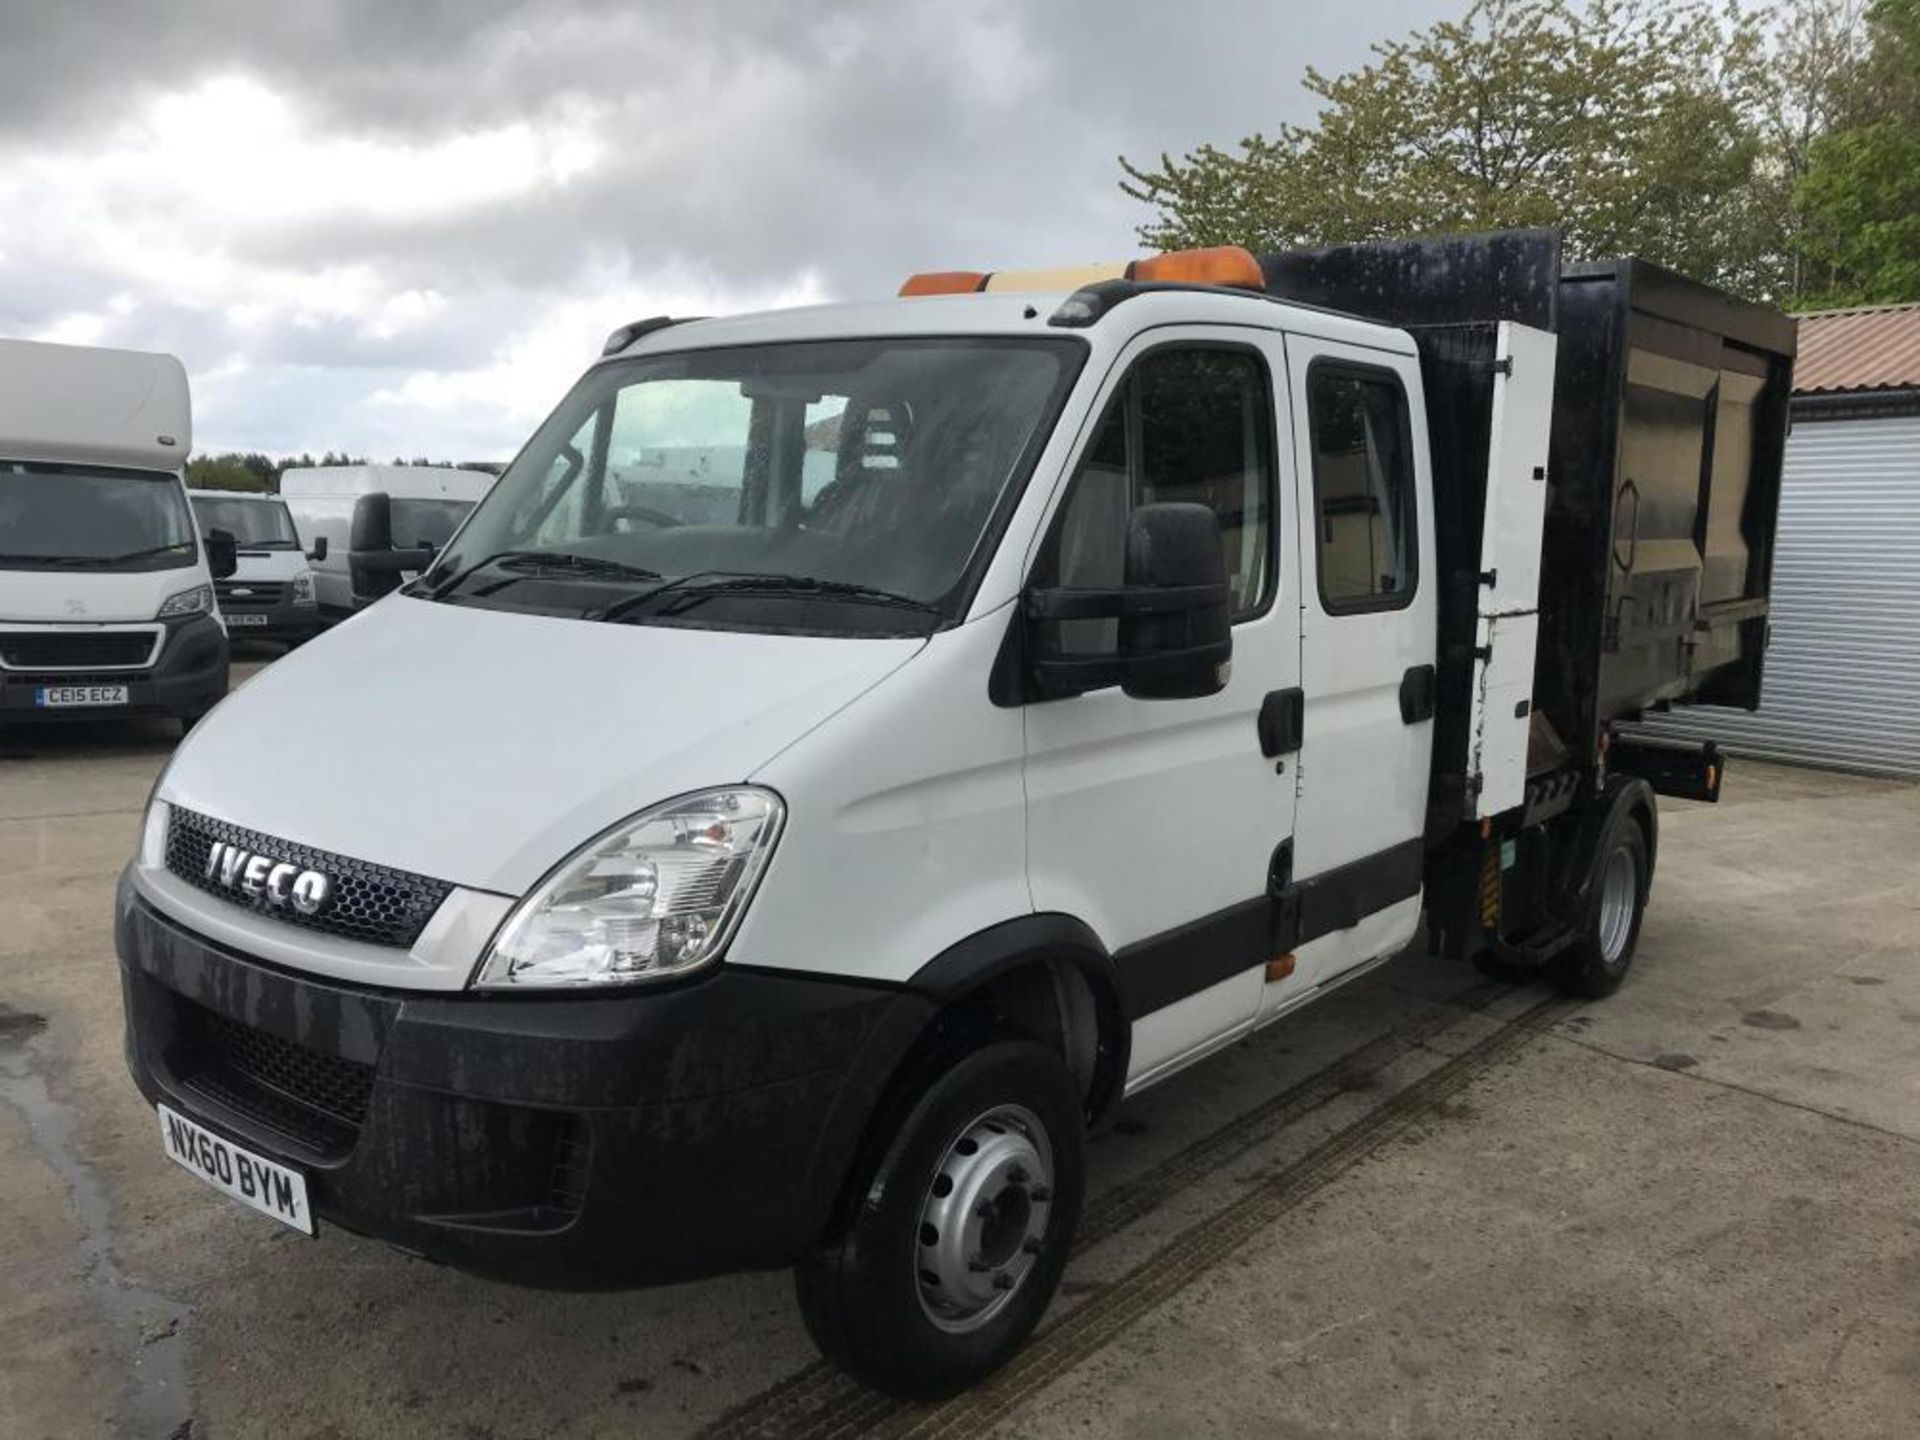 2010/60 REG IVECO DAILY 70C17 CREW CAB TIPPER EX-COUNCIL WITH SIDE BIN LIFT *PLUS VAT* - Image 2 of 12